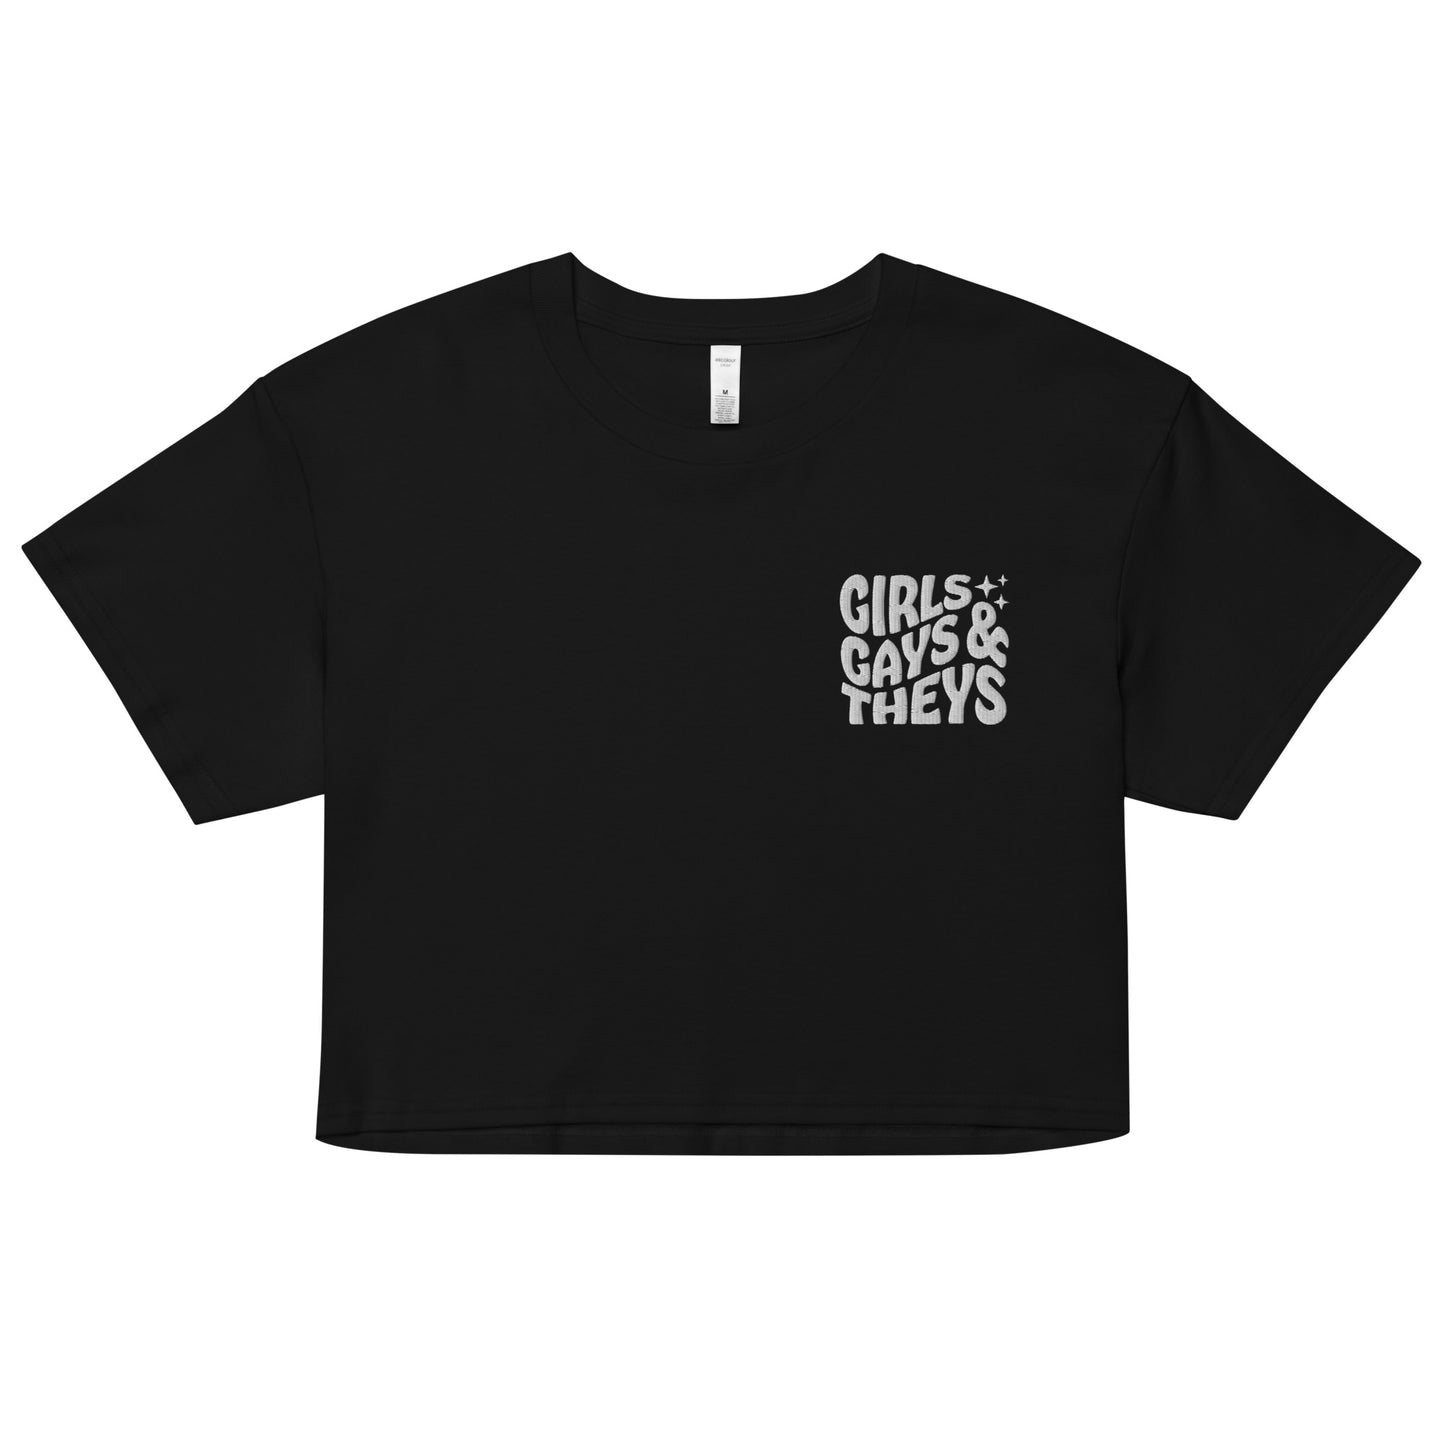 A relaxed, modest black crop top features a subtle white embroidery featuring the quote: girls gays & they's. Adding a touch of LGBTQ+ to your look—a playful celebration of queer culture! Made from 100% combed cotton. Available in Extra Small, Small, Medium, Large, Extra Large.